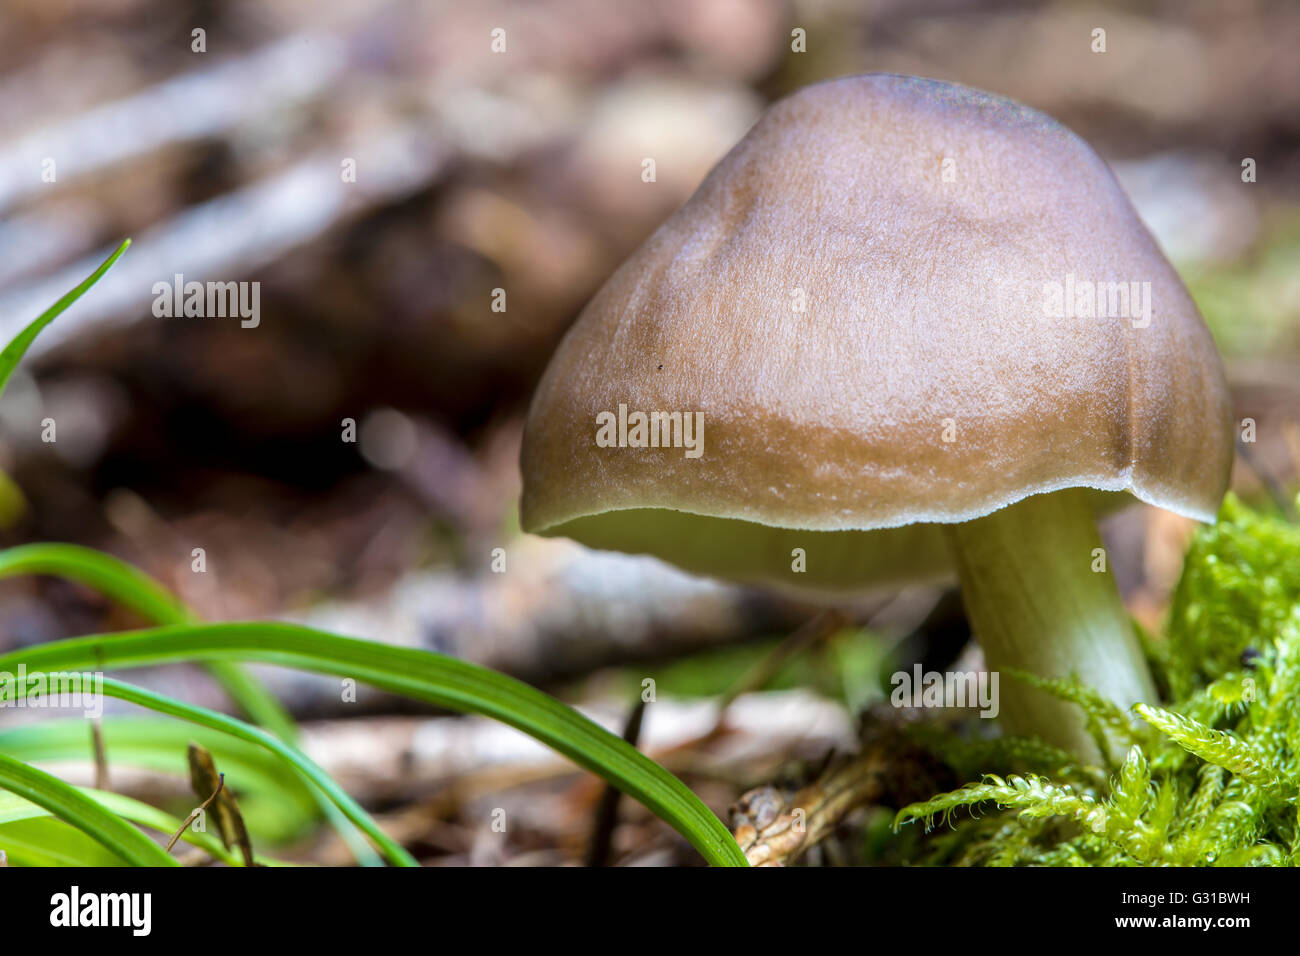 Closeup view of a small mushroom in grass of underwood Stock Photo